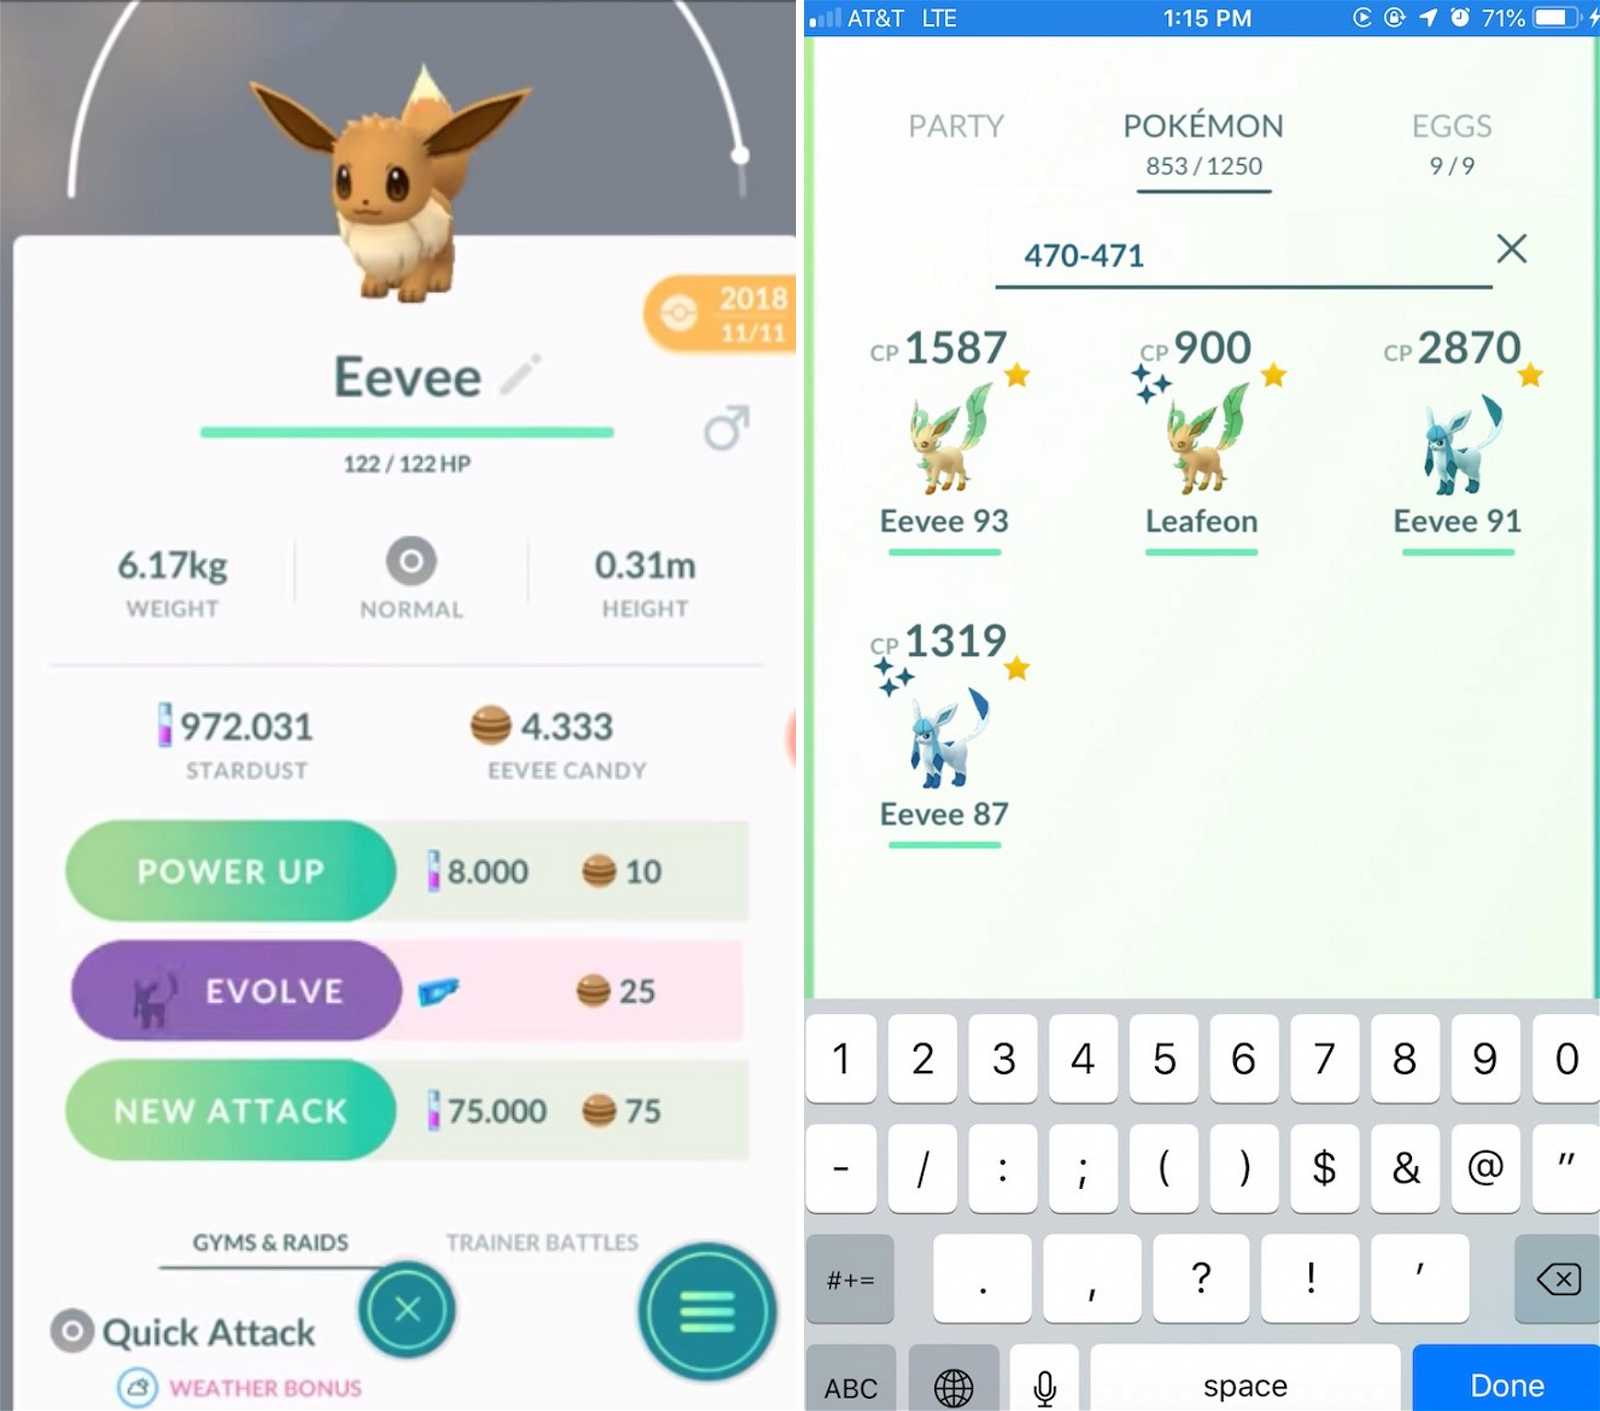 How to Evolve Eevee into Glaceon or Leafeon in Pokémon Go